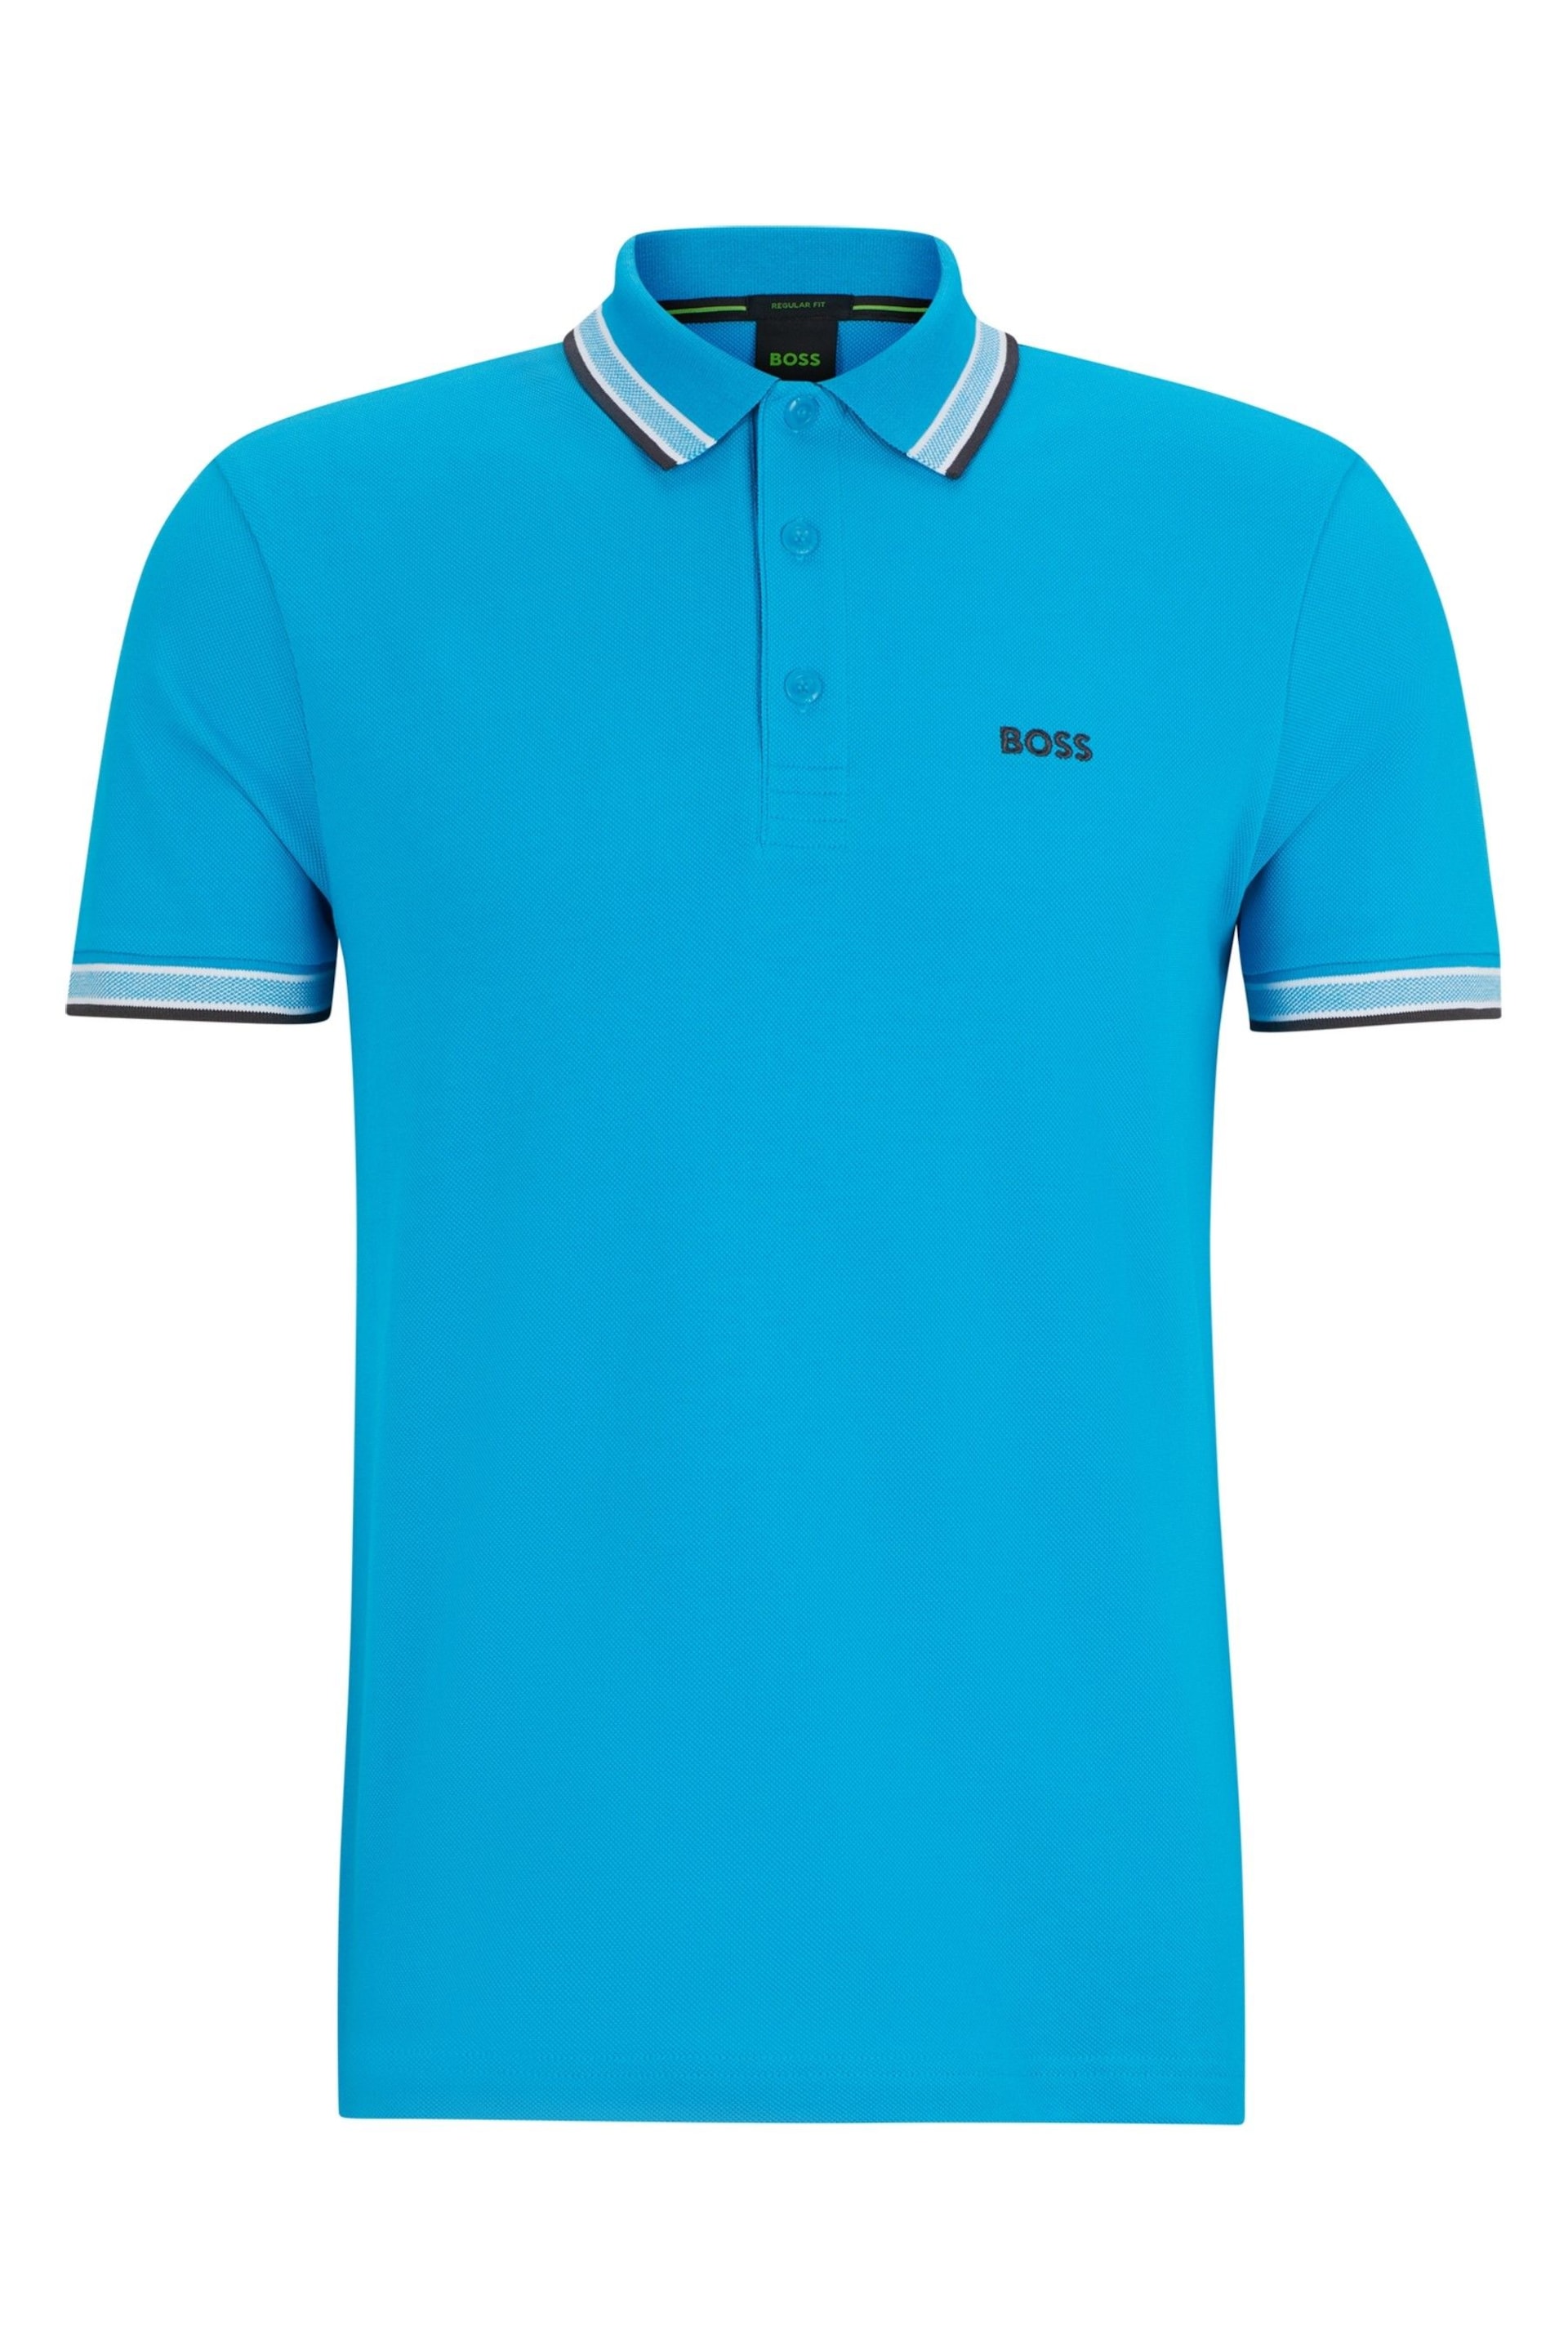 BOSS Blue Chrome Cotton Polo Shirt With Contrast Logo Details - Image 5 of 5